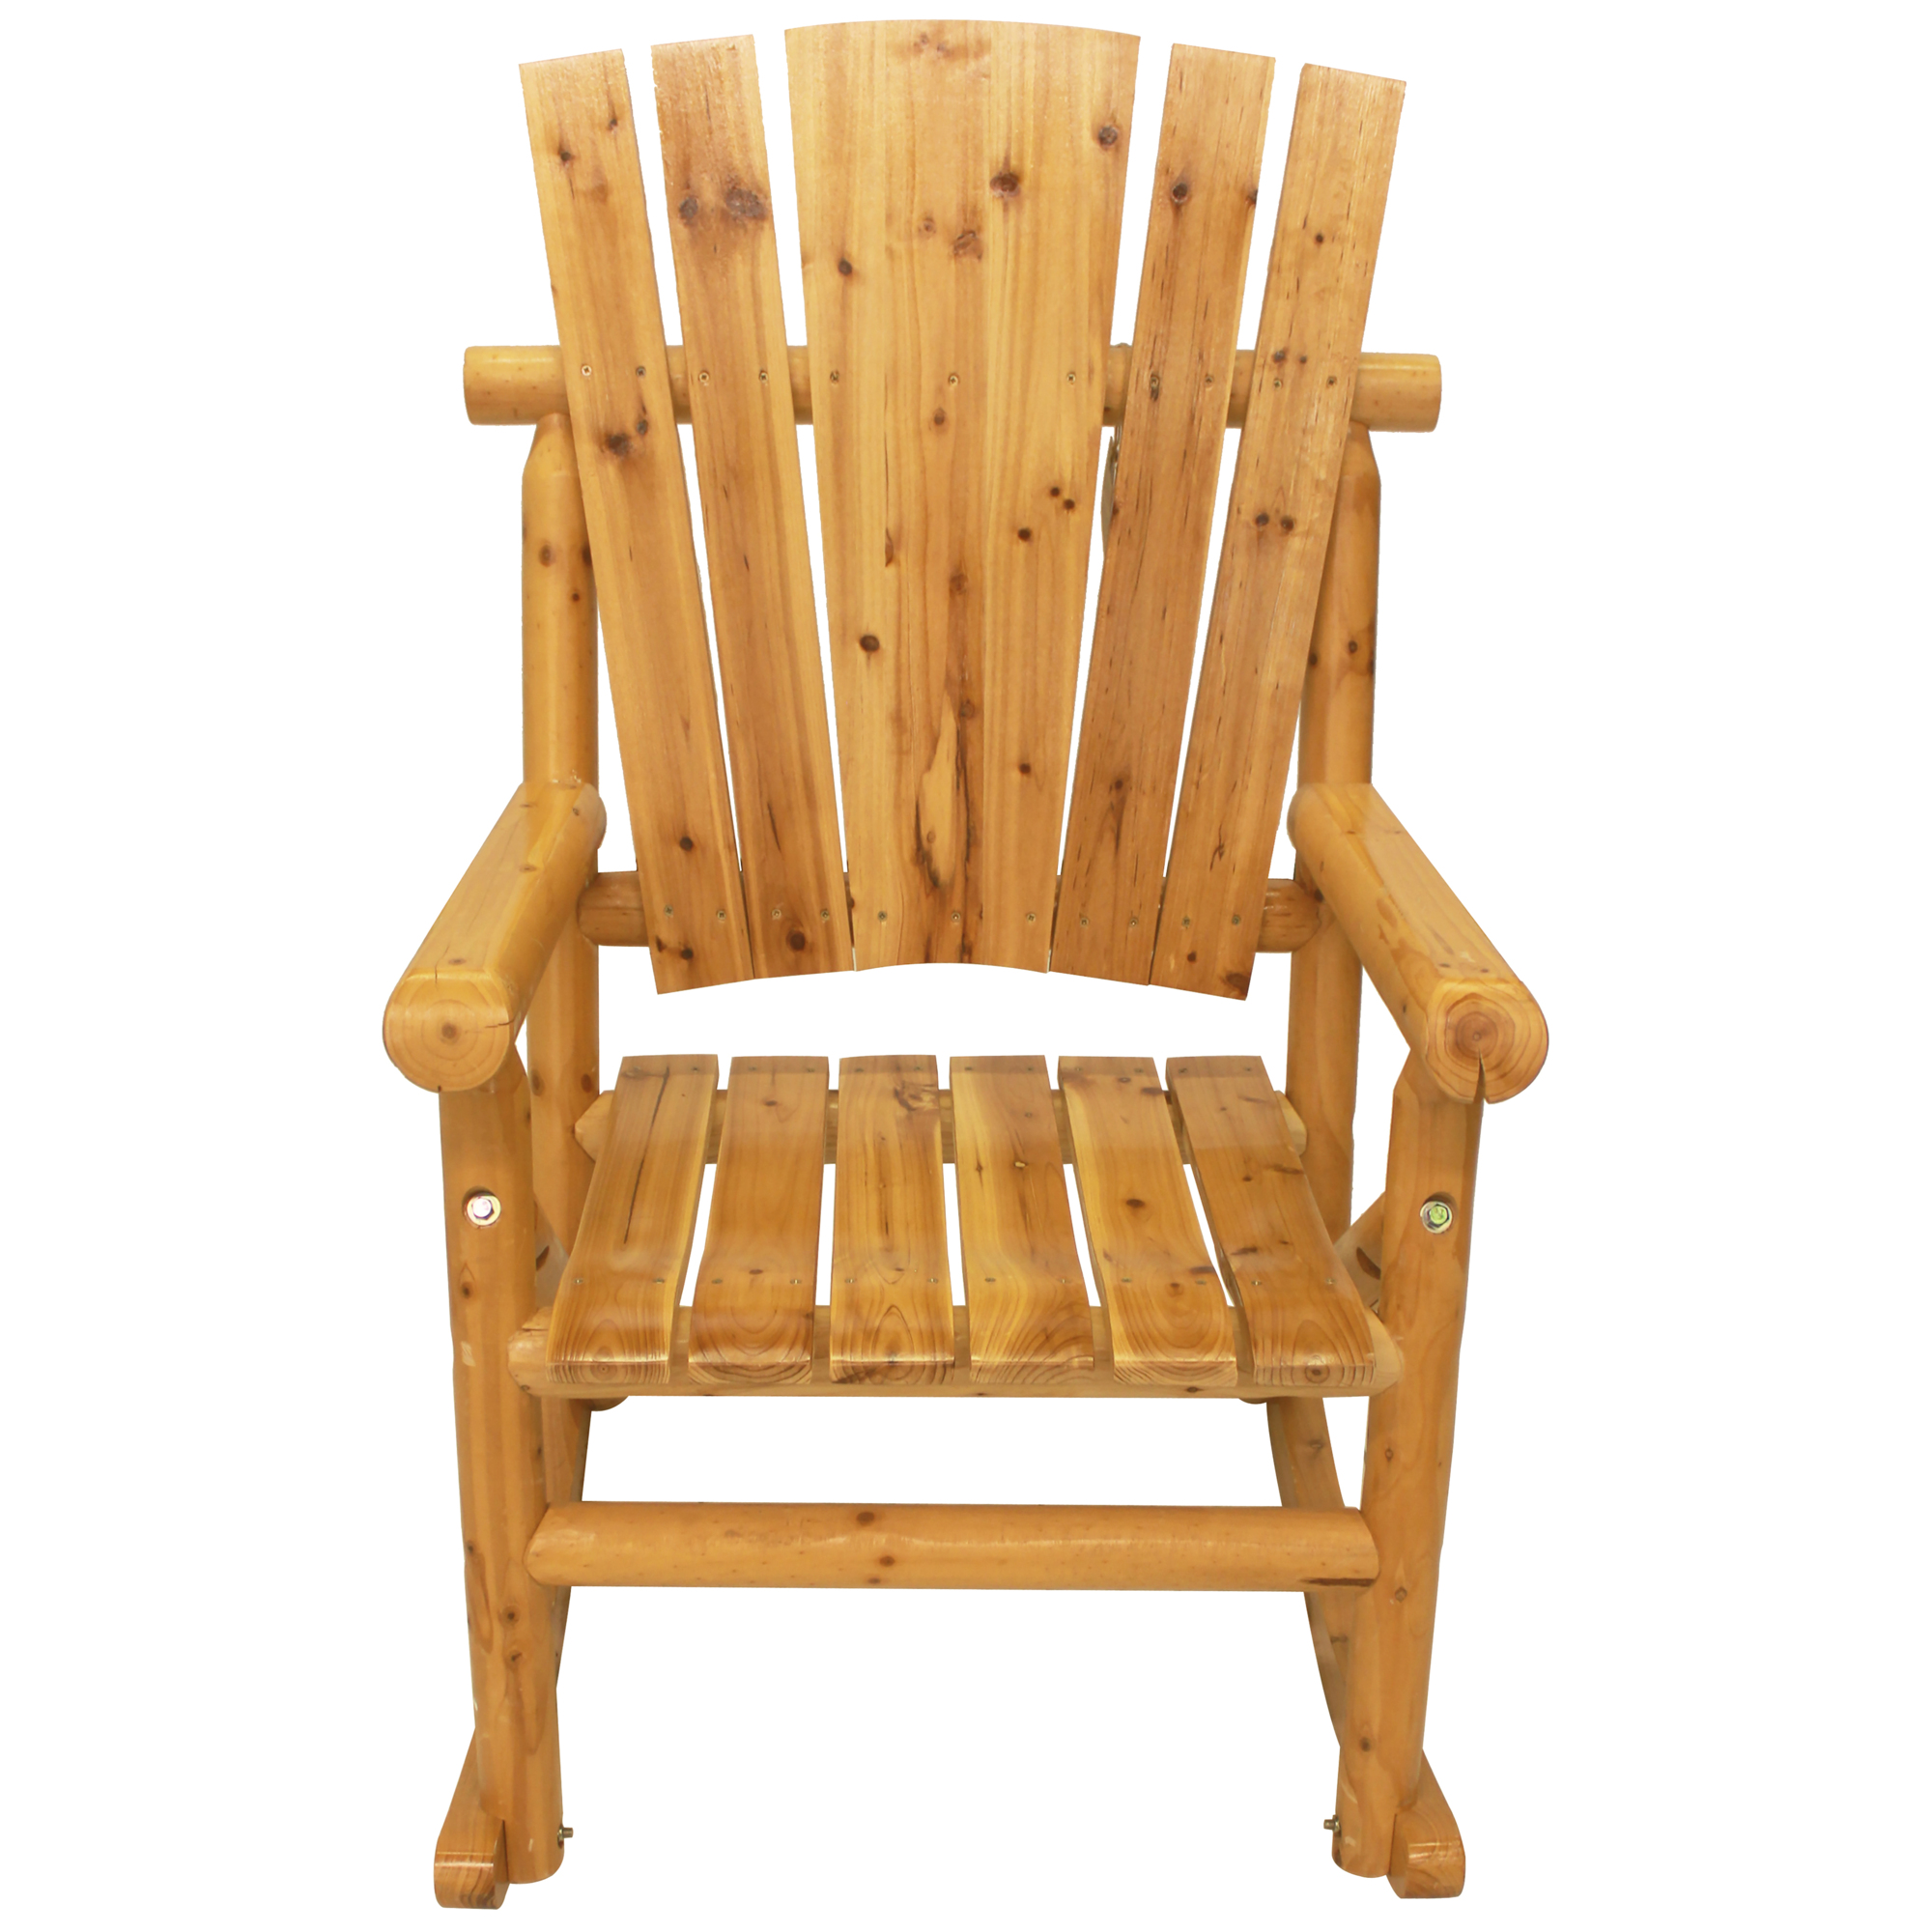 Leigh Country, Aspen Rocker, Primary Color Beige, Material Wood, Width 29.52 in, Model TX 95100